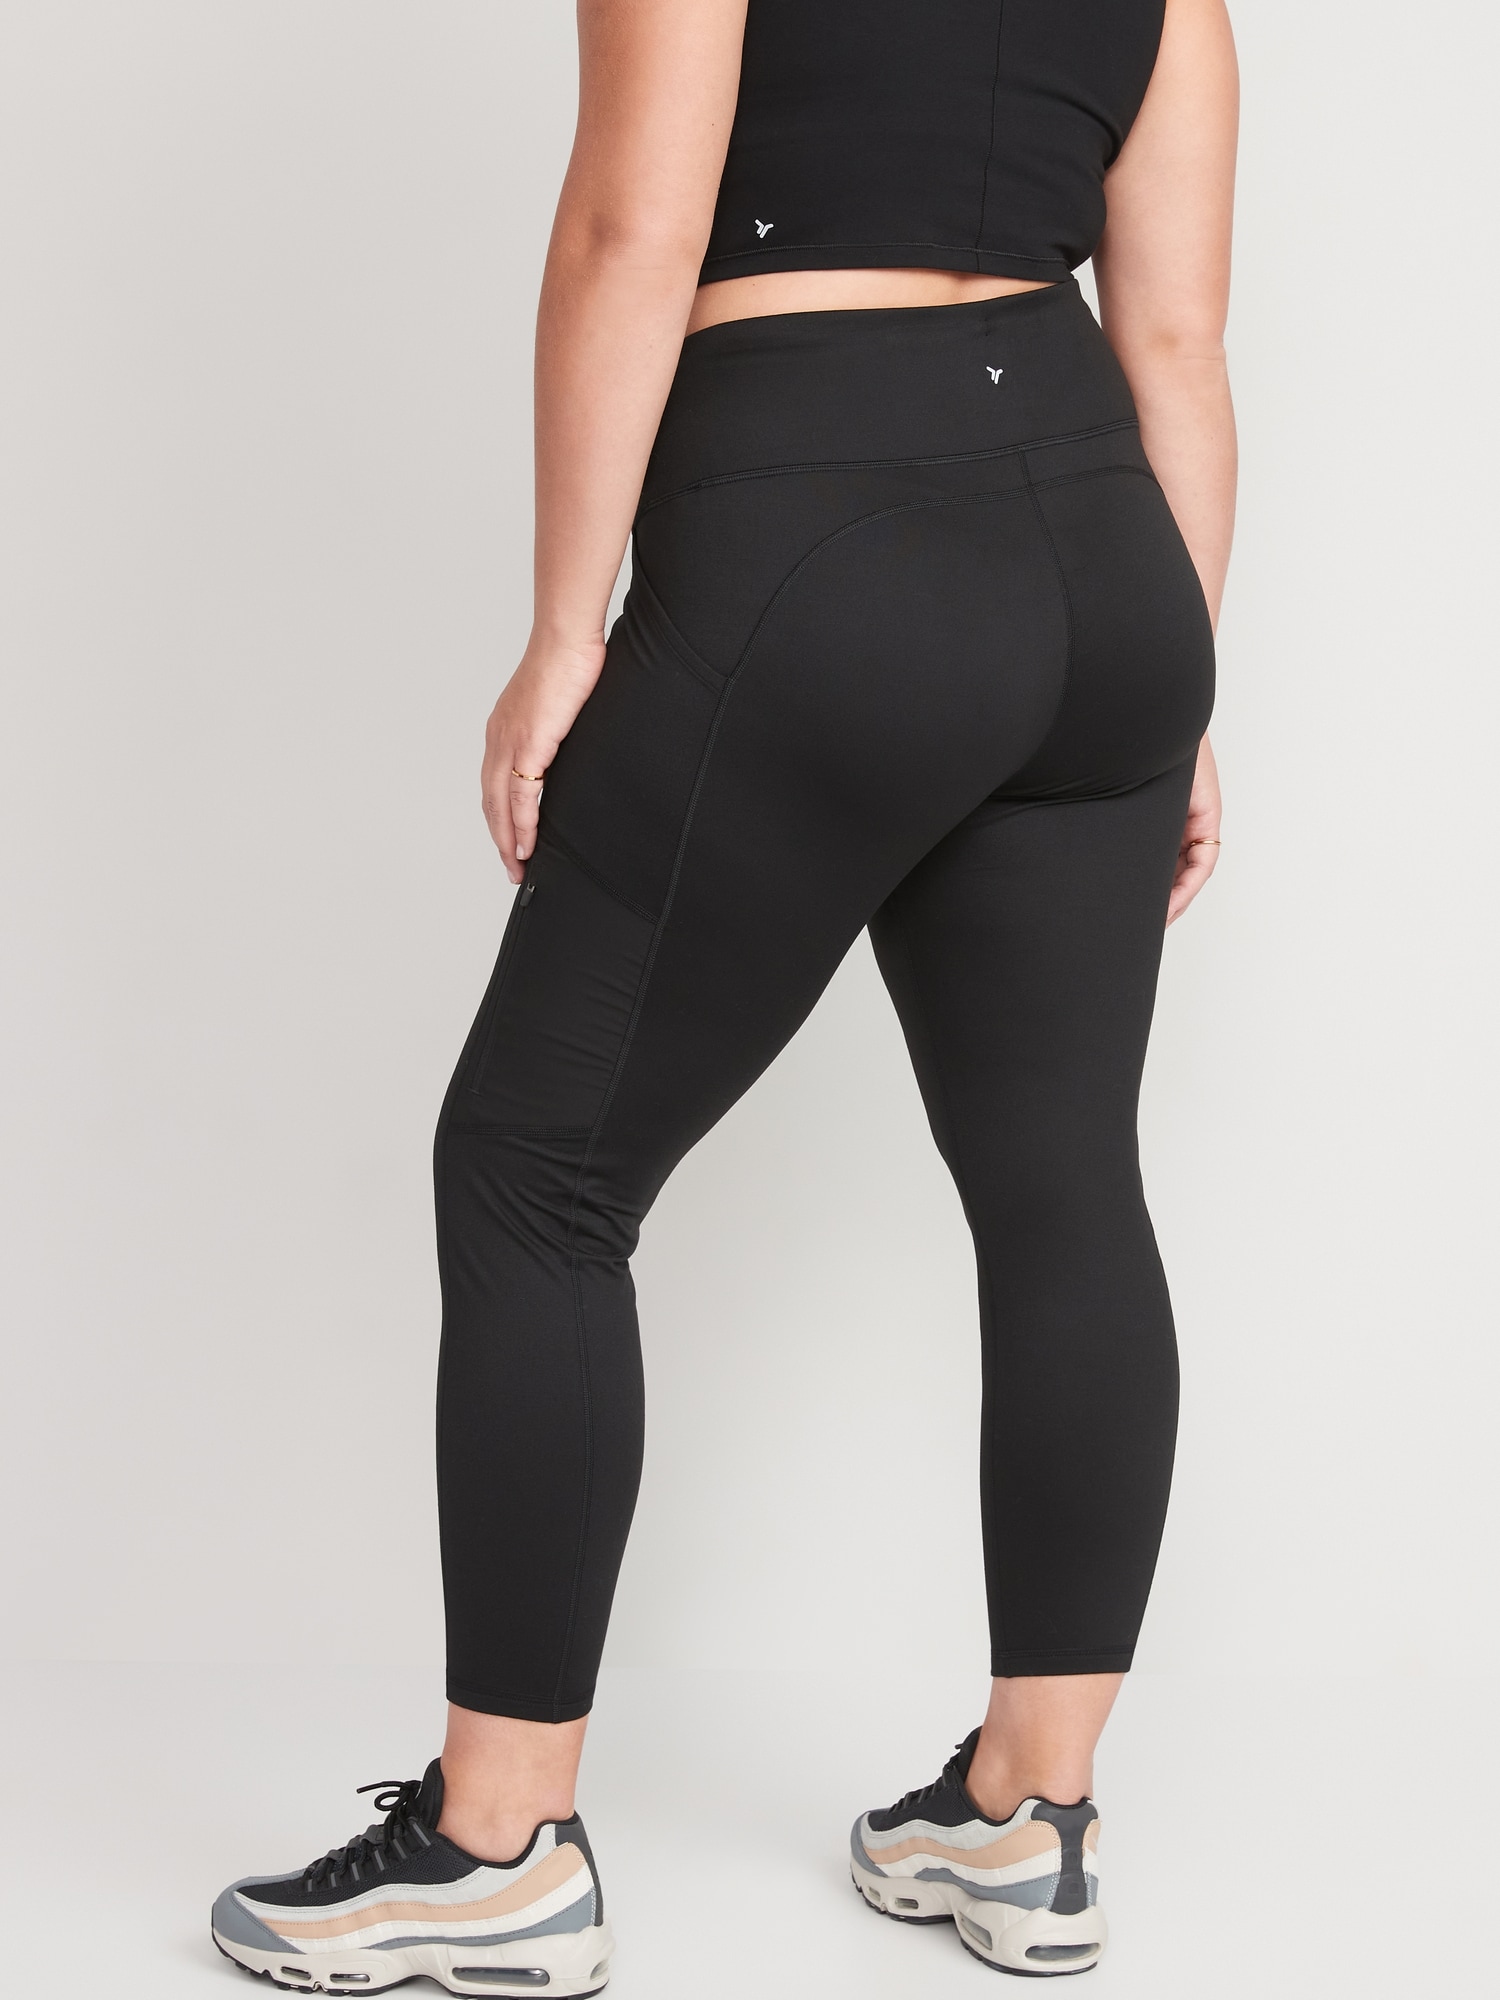 Old Navy High-Waisted CozeCore Herringbone Leggings, As a Fitness Editor,  I'm Thoroughly Impressed By Old Navy's Activewear Selection